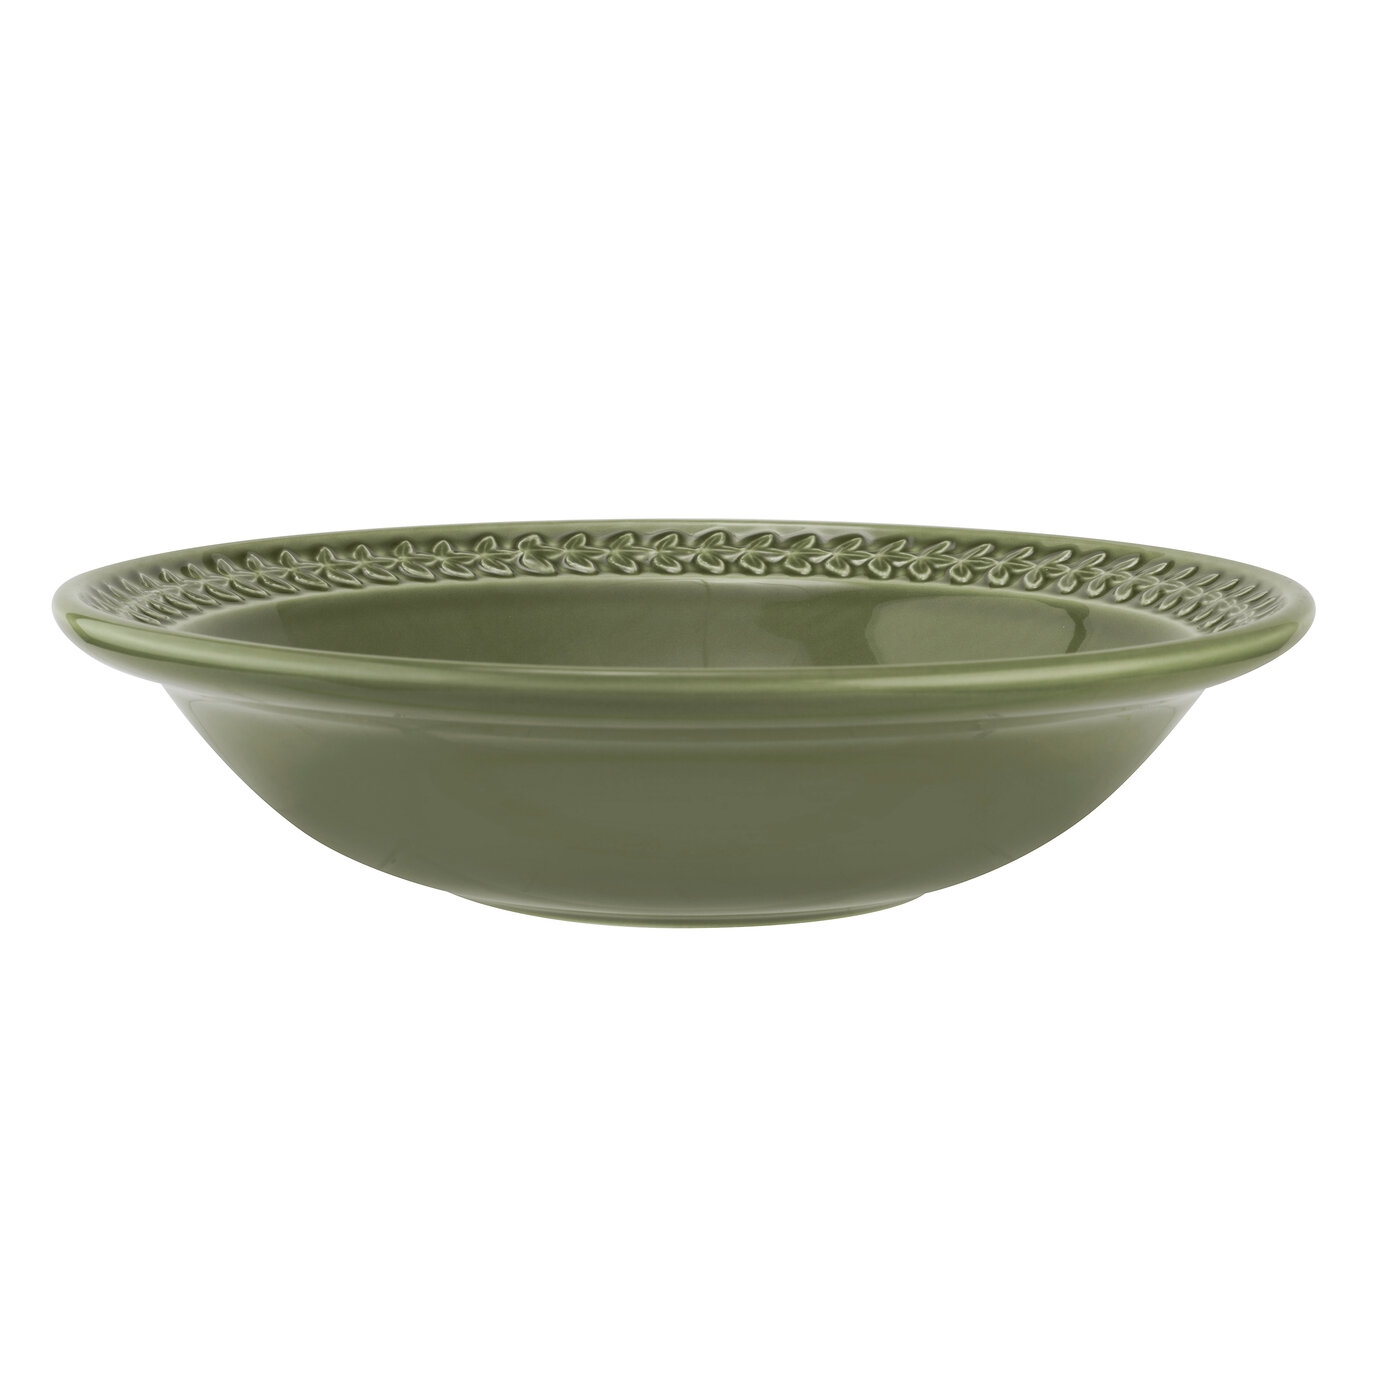 Botanic Garden Harmony 9 Inch Deep Pasta Bowl Forest Green image number null